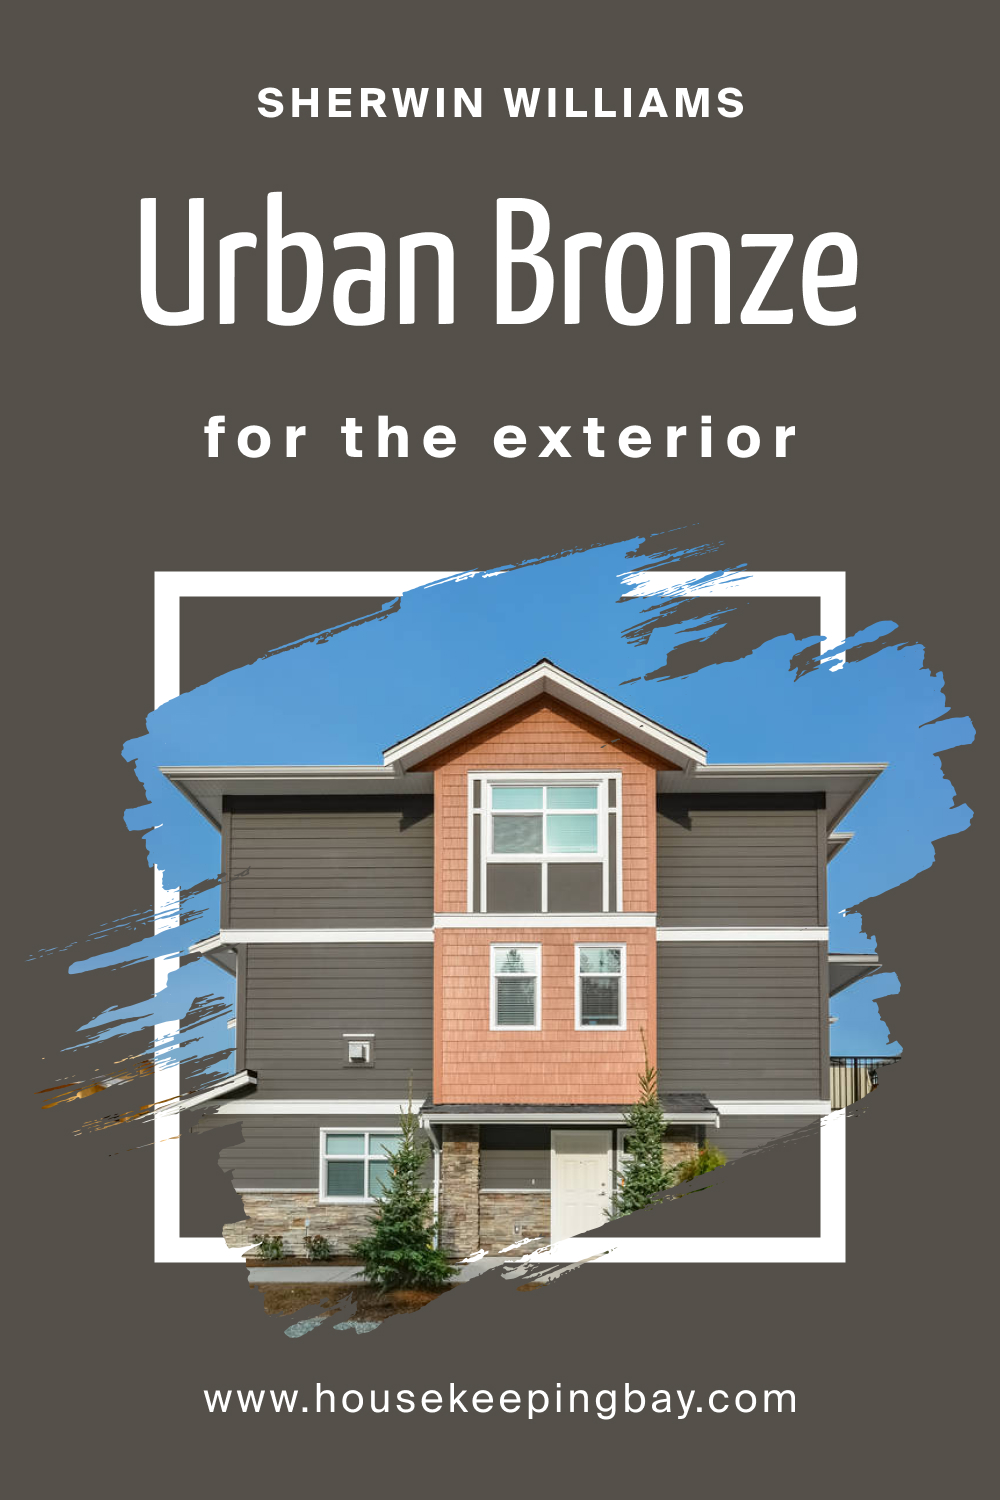 Sherwin Williams Urban Bronze Paint Color in exterior